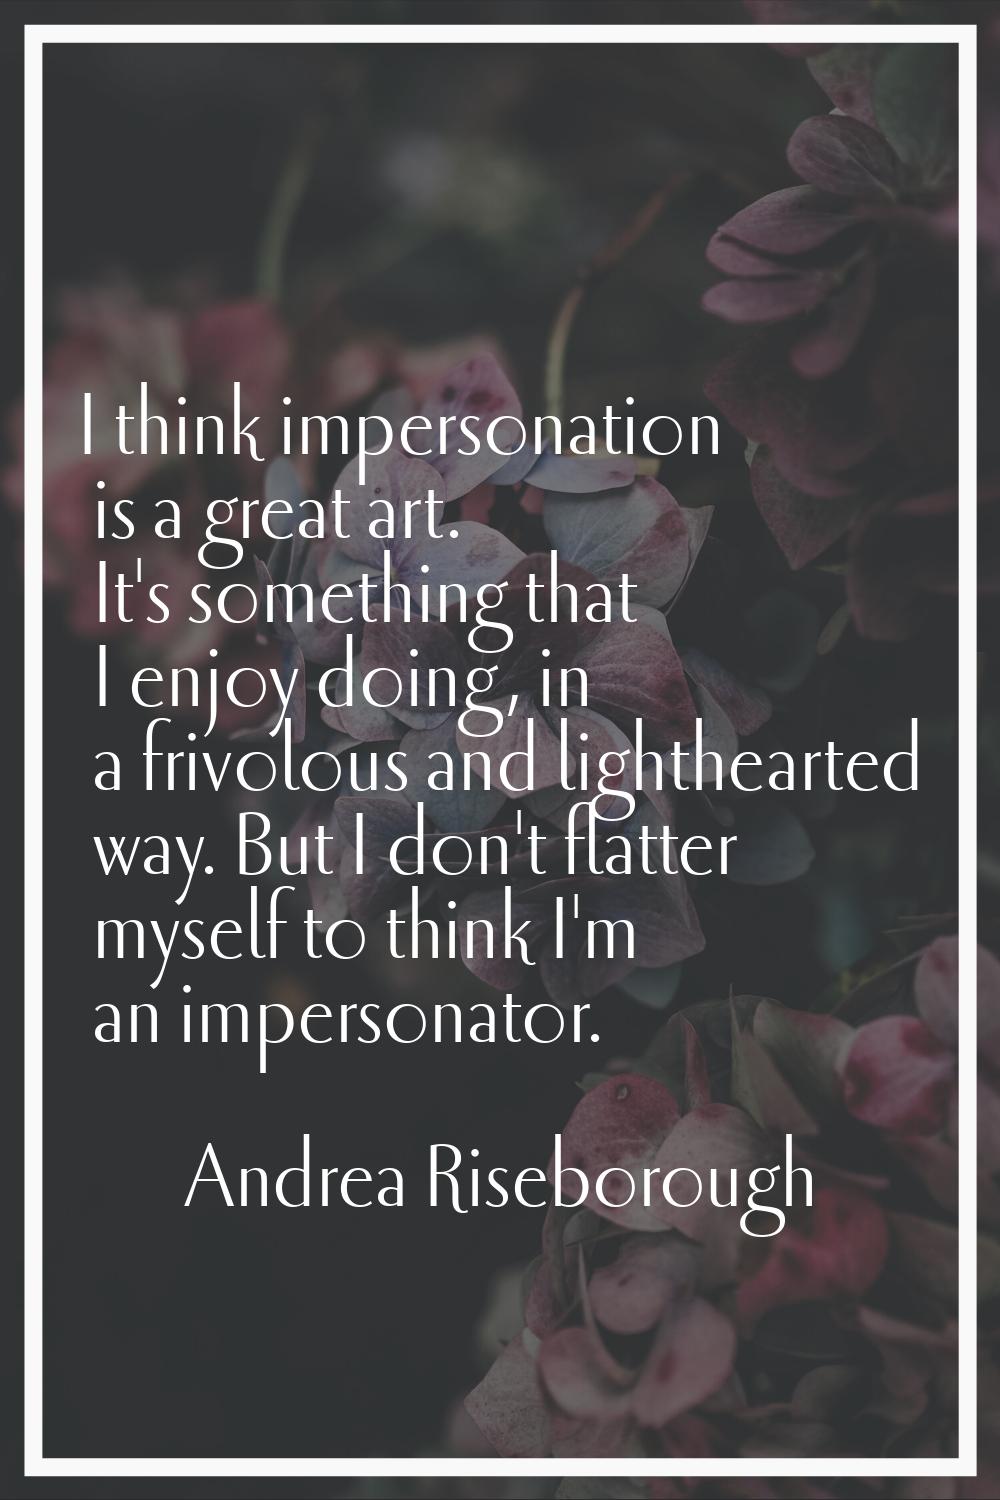 I think impersonation is a great art. It's something that I enjoy doing, in a frivolous and lighthe